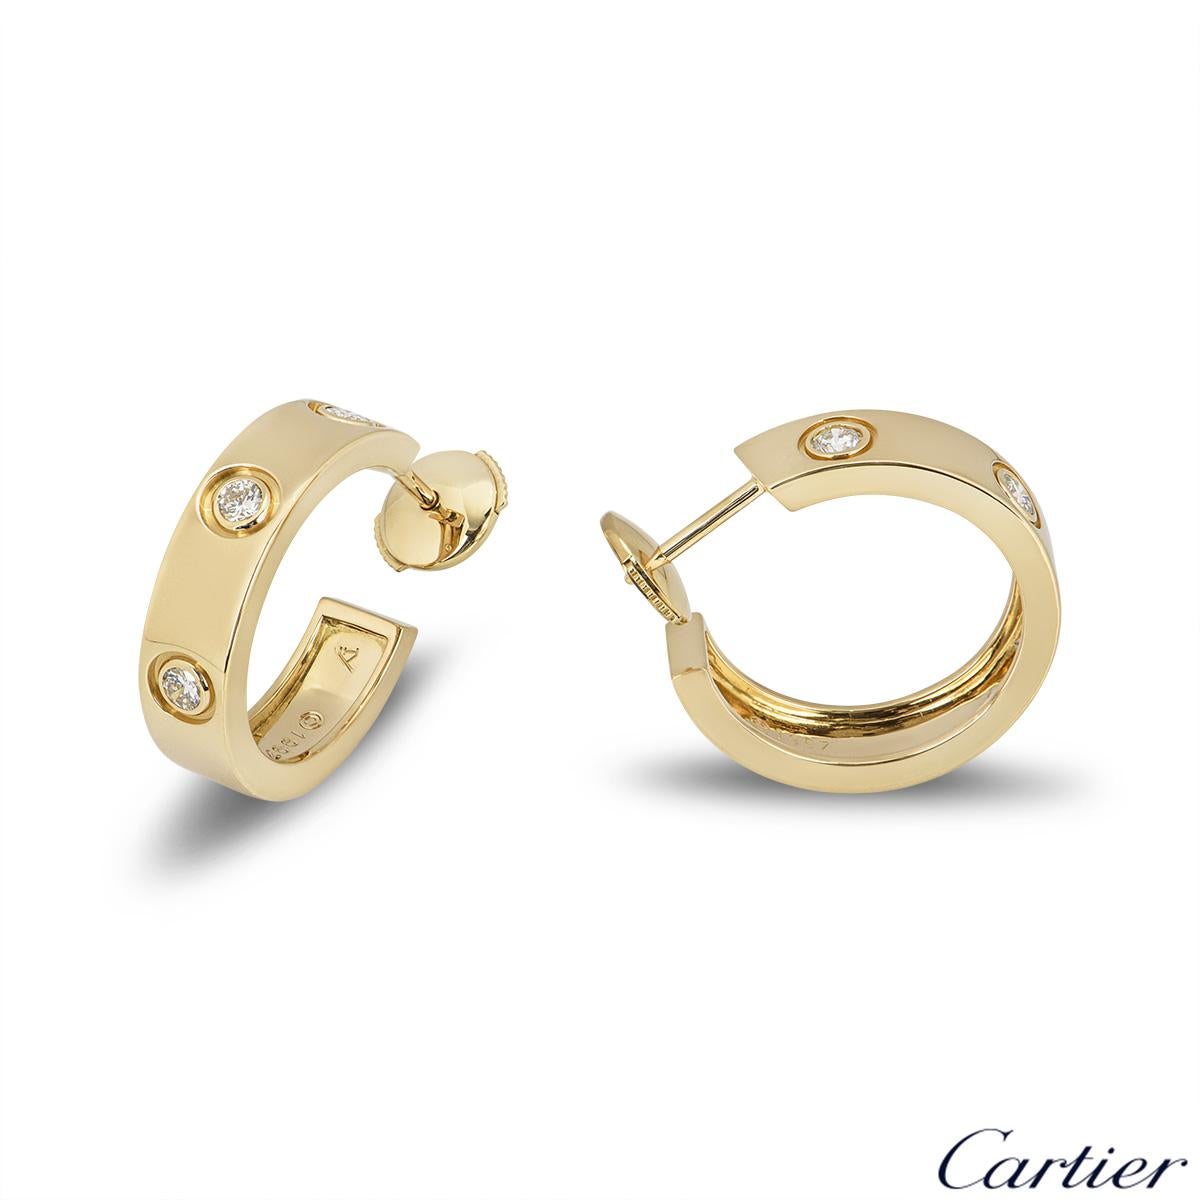 A pair of 18k yellow gold diamond earrings from the iconic Love collection by Cartier. Each hoop earring is set with 3 round brilliant cut diamonds. The earrings are 20mm in length and 5mm in width and feature a post and lever hinged fittings. The